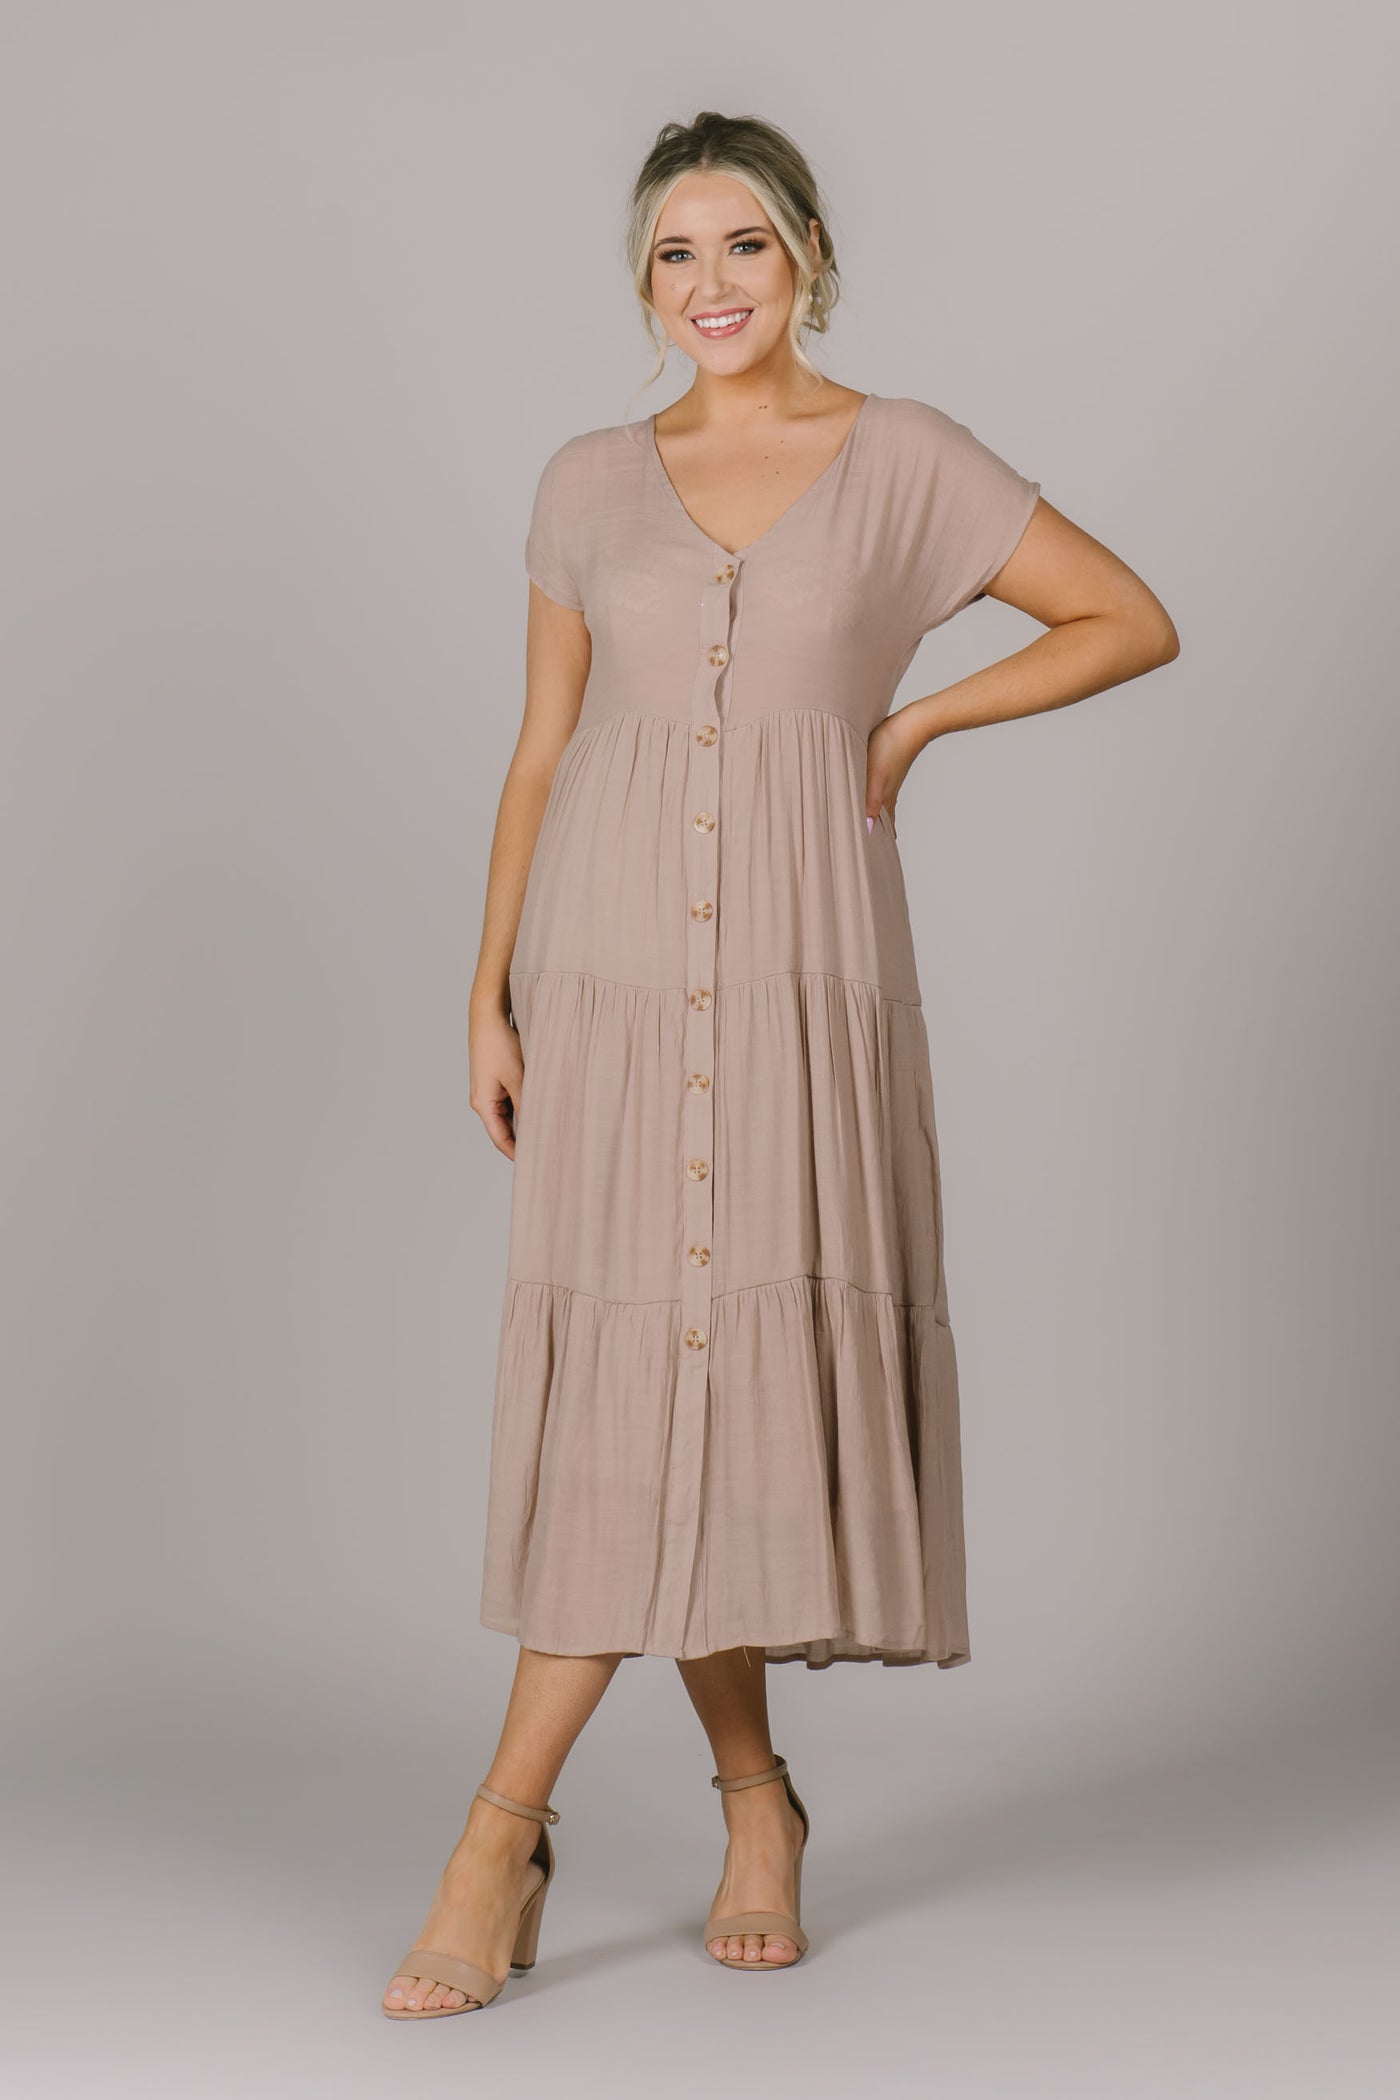 The Emma dress features a V-neck, buttons down the front, and tiered skirt design.